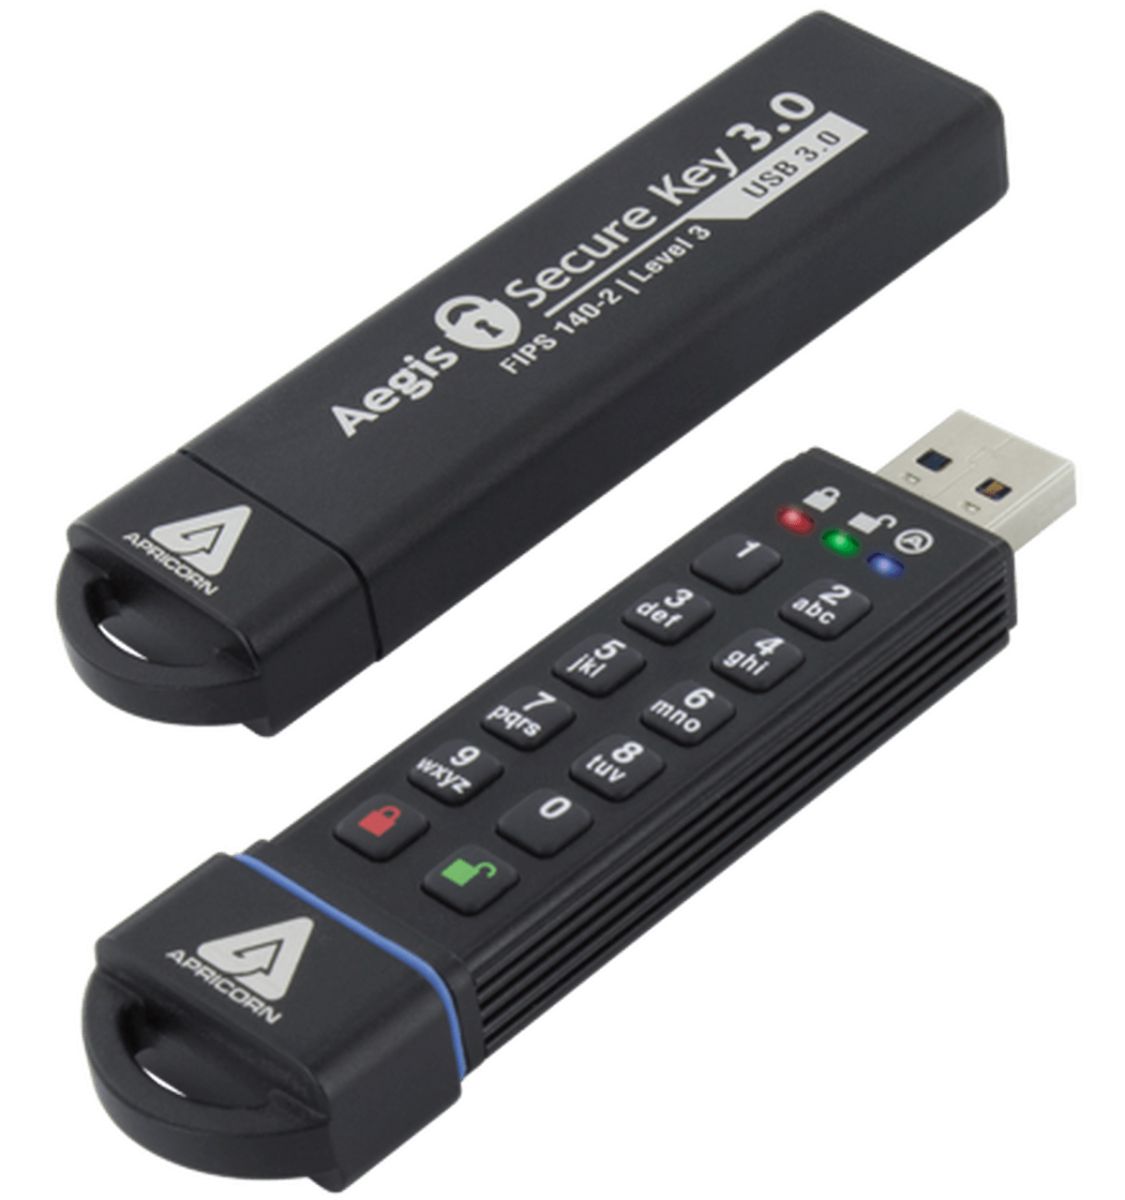 apricorn ask3 fips 16gb usbstick